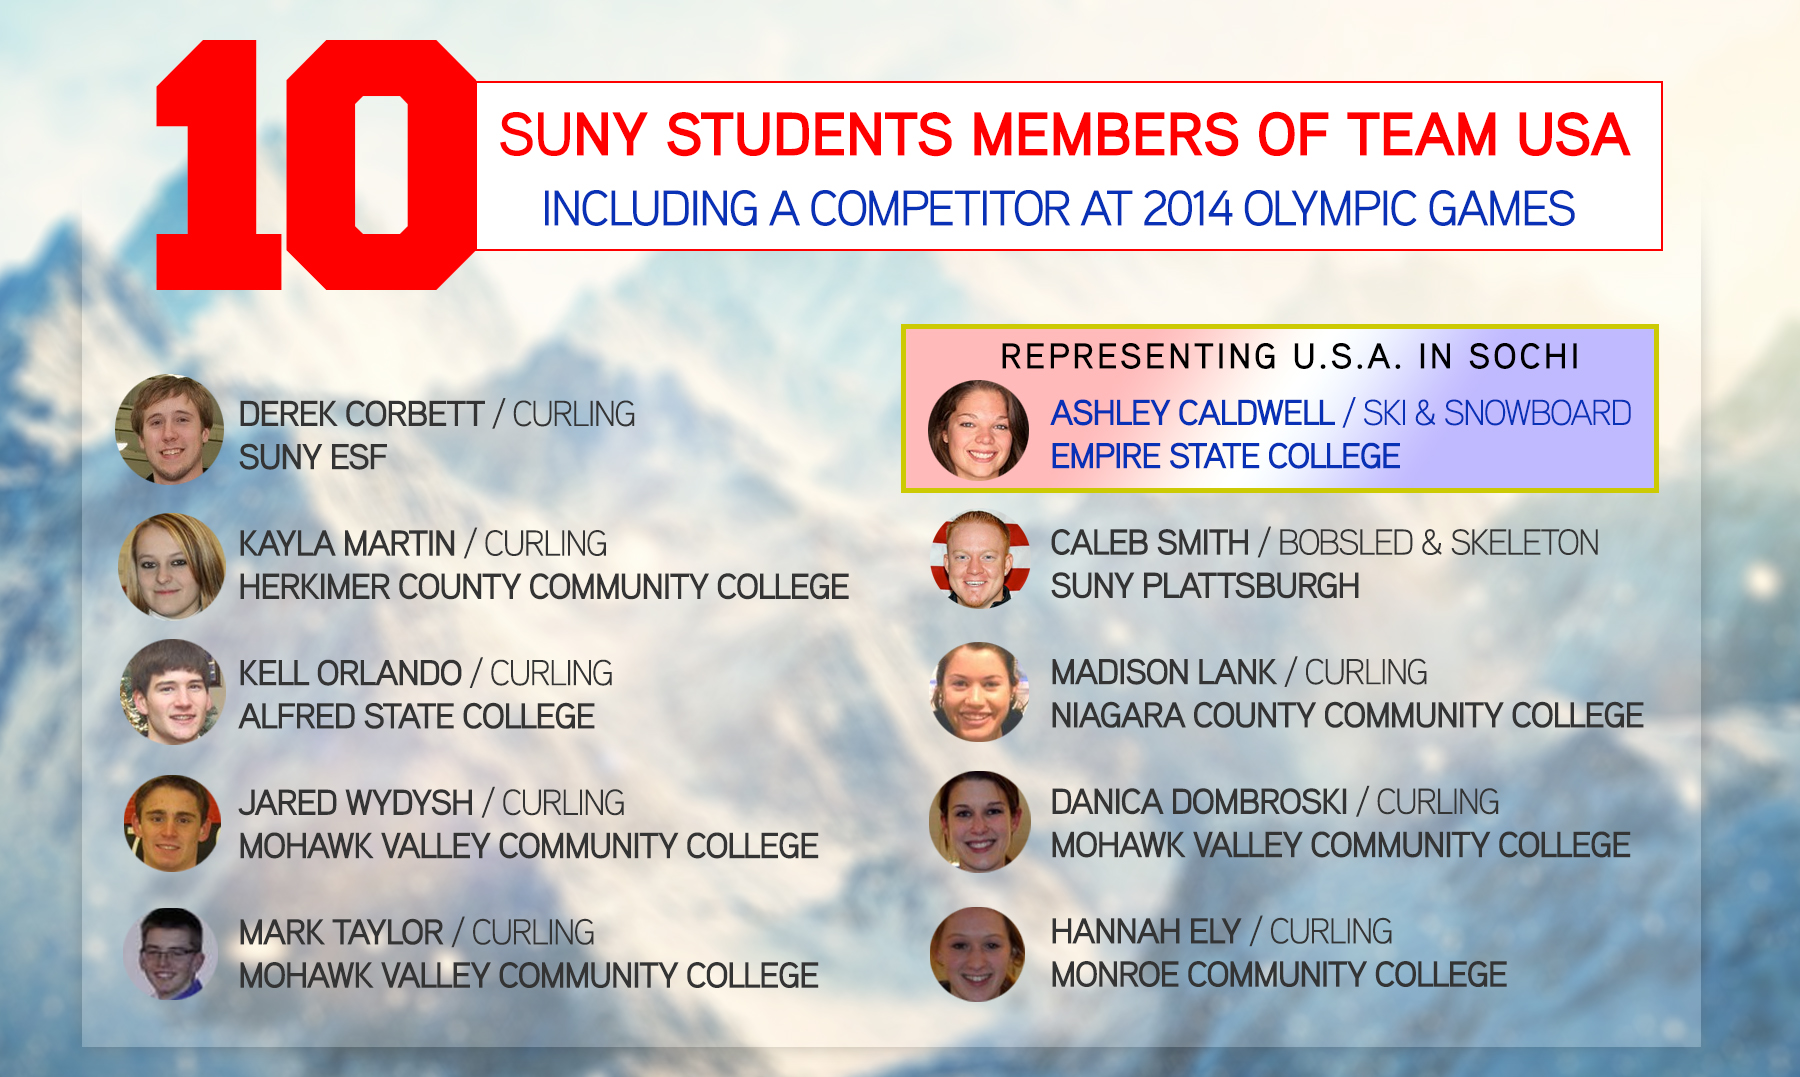 SUNY students on Team USA, including Ashley Caldwell of Empire State College, a competitor at the 2014 winter olympic games.